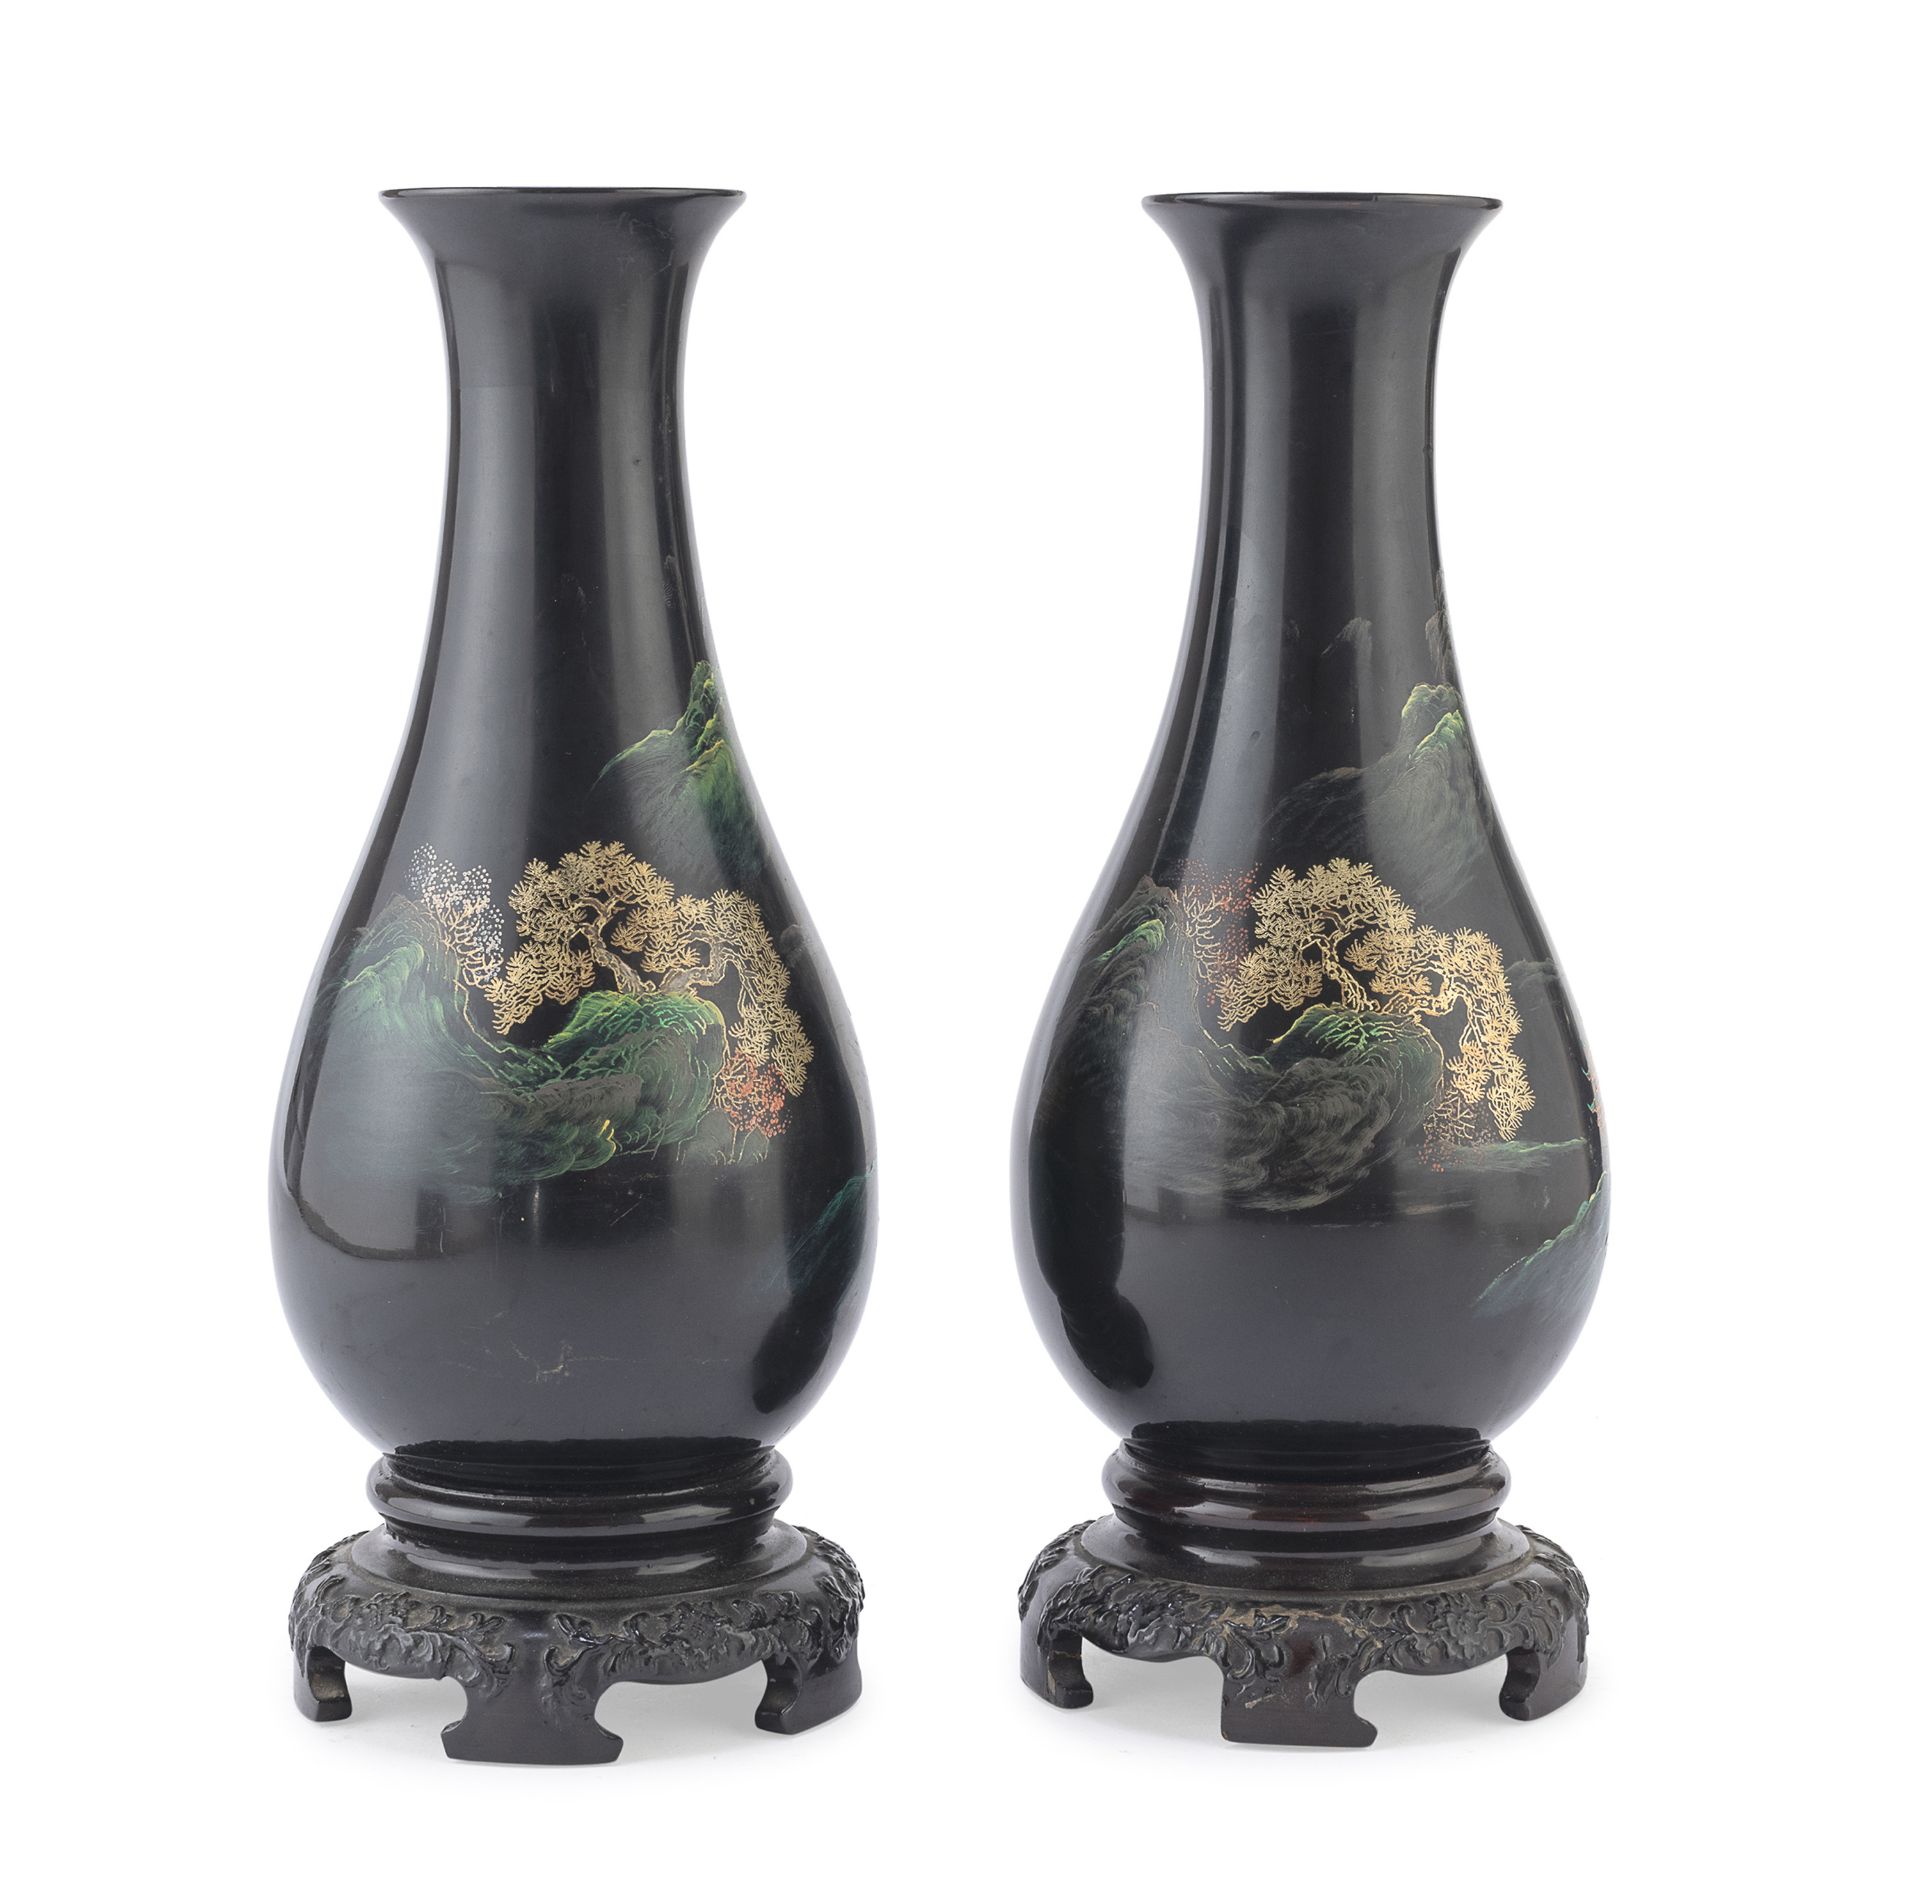 A PAIR OF CHINESE RESIN VASES 20TH CENTURY.